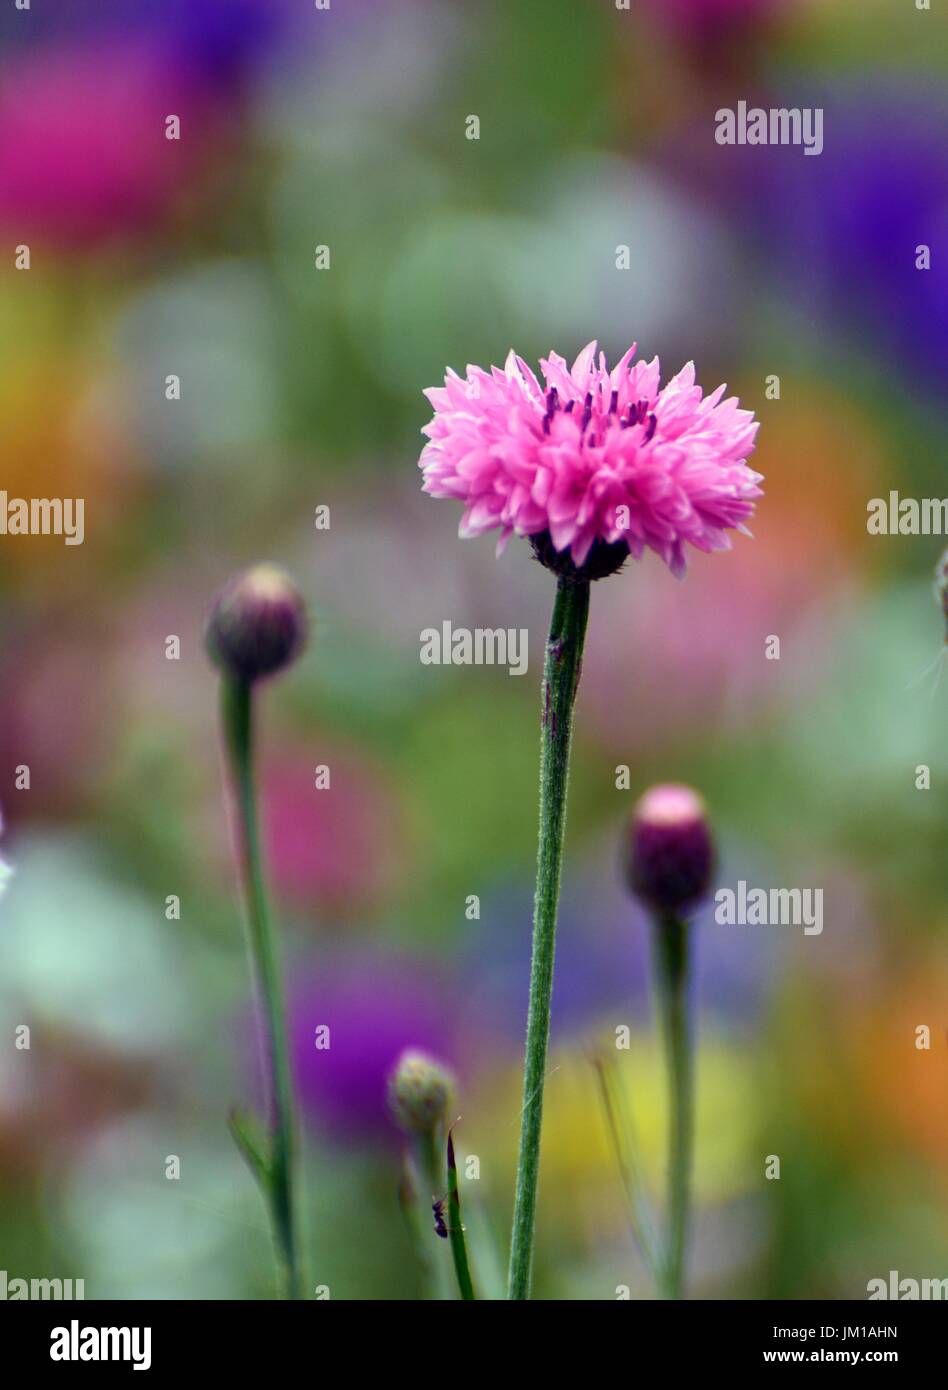 A close-up of a pink cornflower in a hay meadow Stock Photo